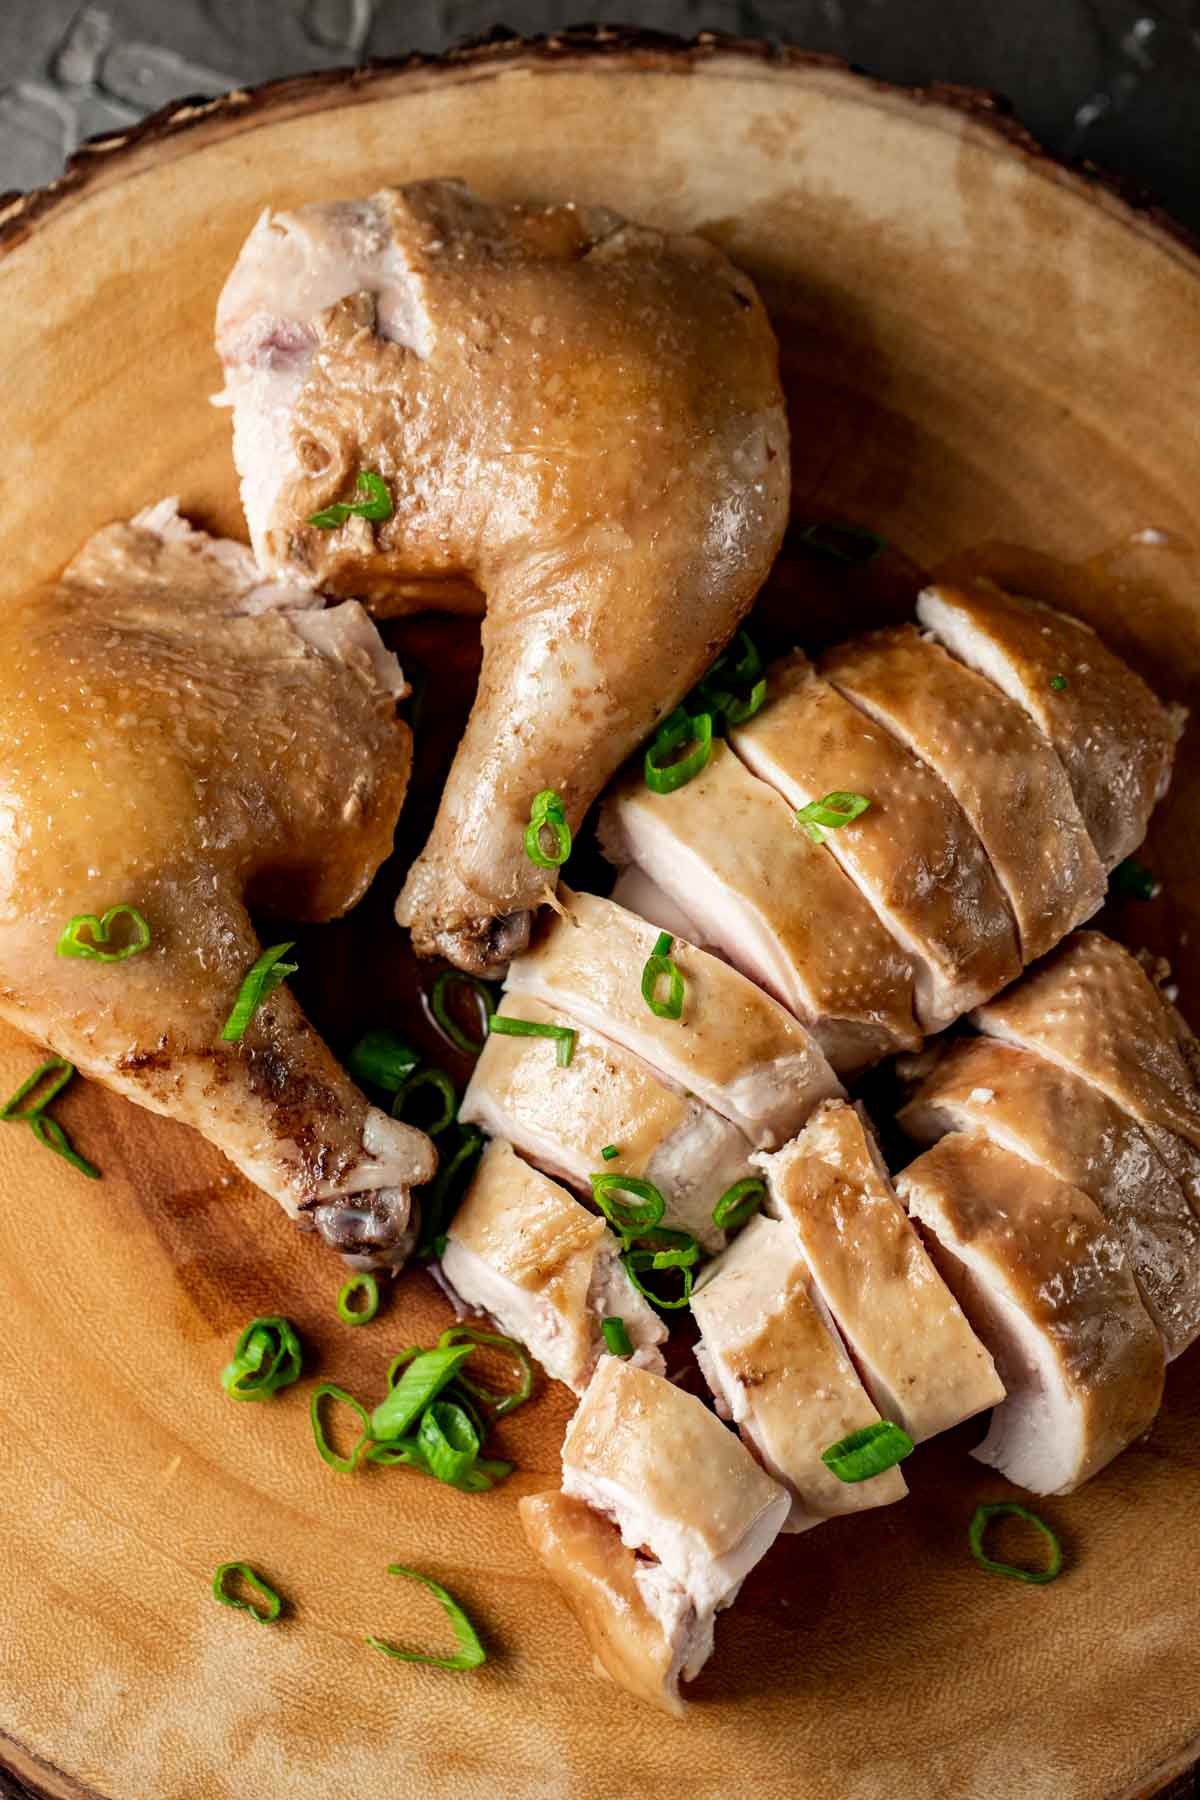 Soy sauce chicken cut into pieces and topped with green onions.